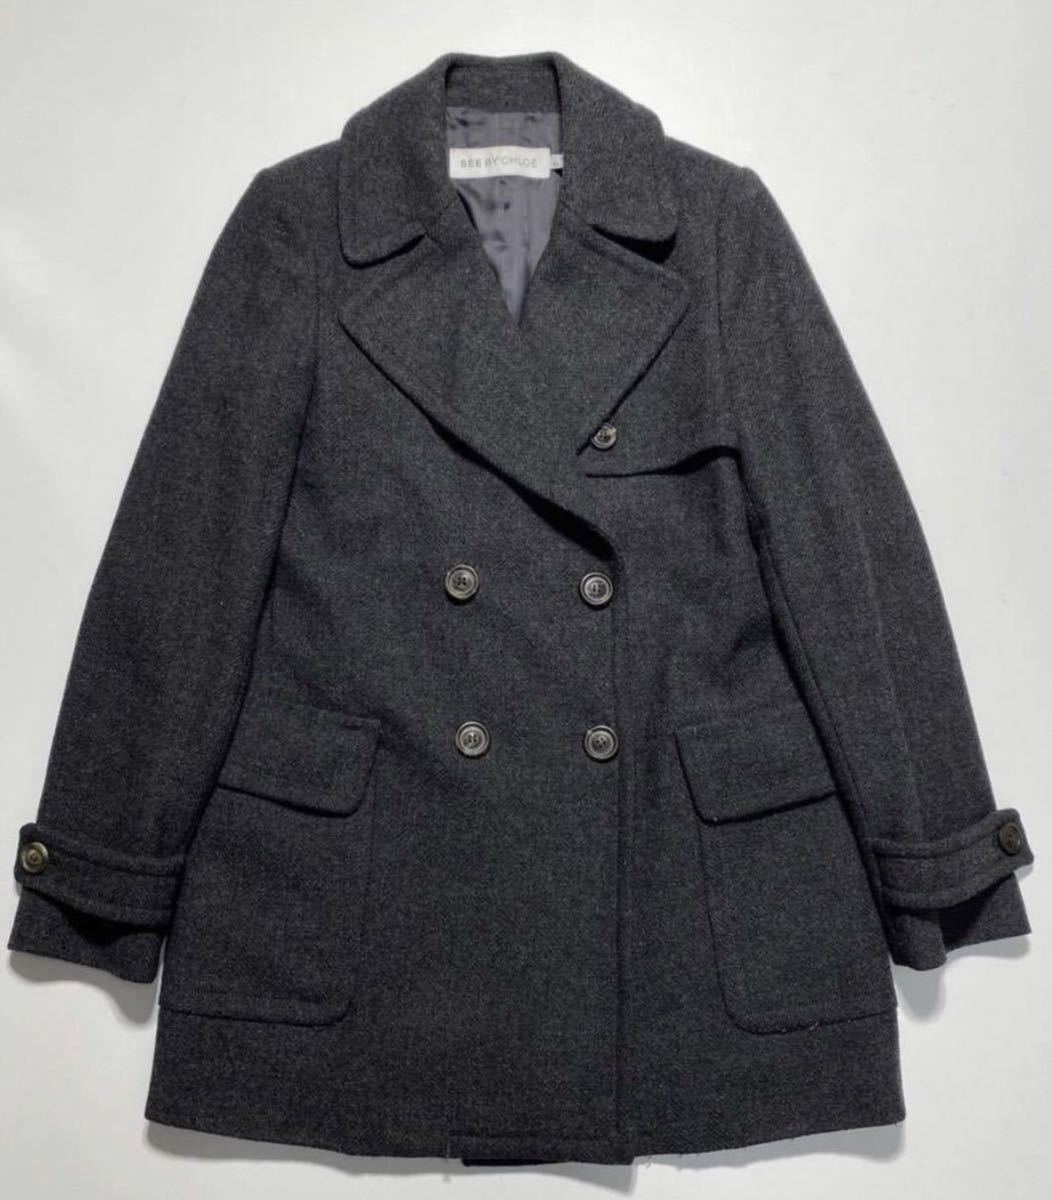 【USA:4】SEE BY CHLOE Distributed by sinv Wool Coat シーバイクロエ ウール コート Pコート (MOD.L.J12500) Y1159_画像1